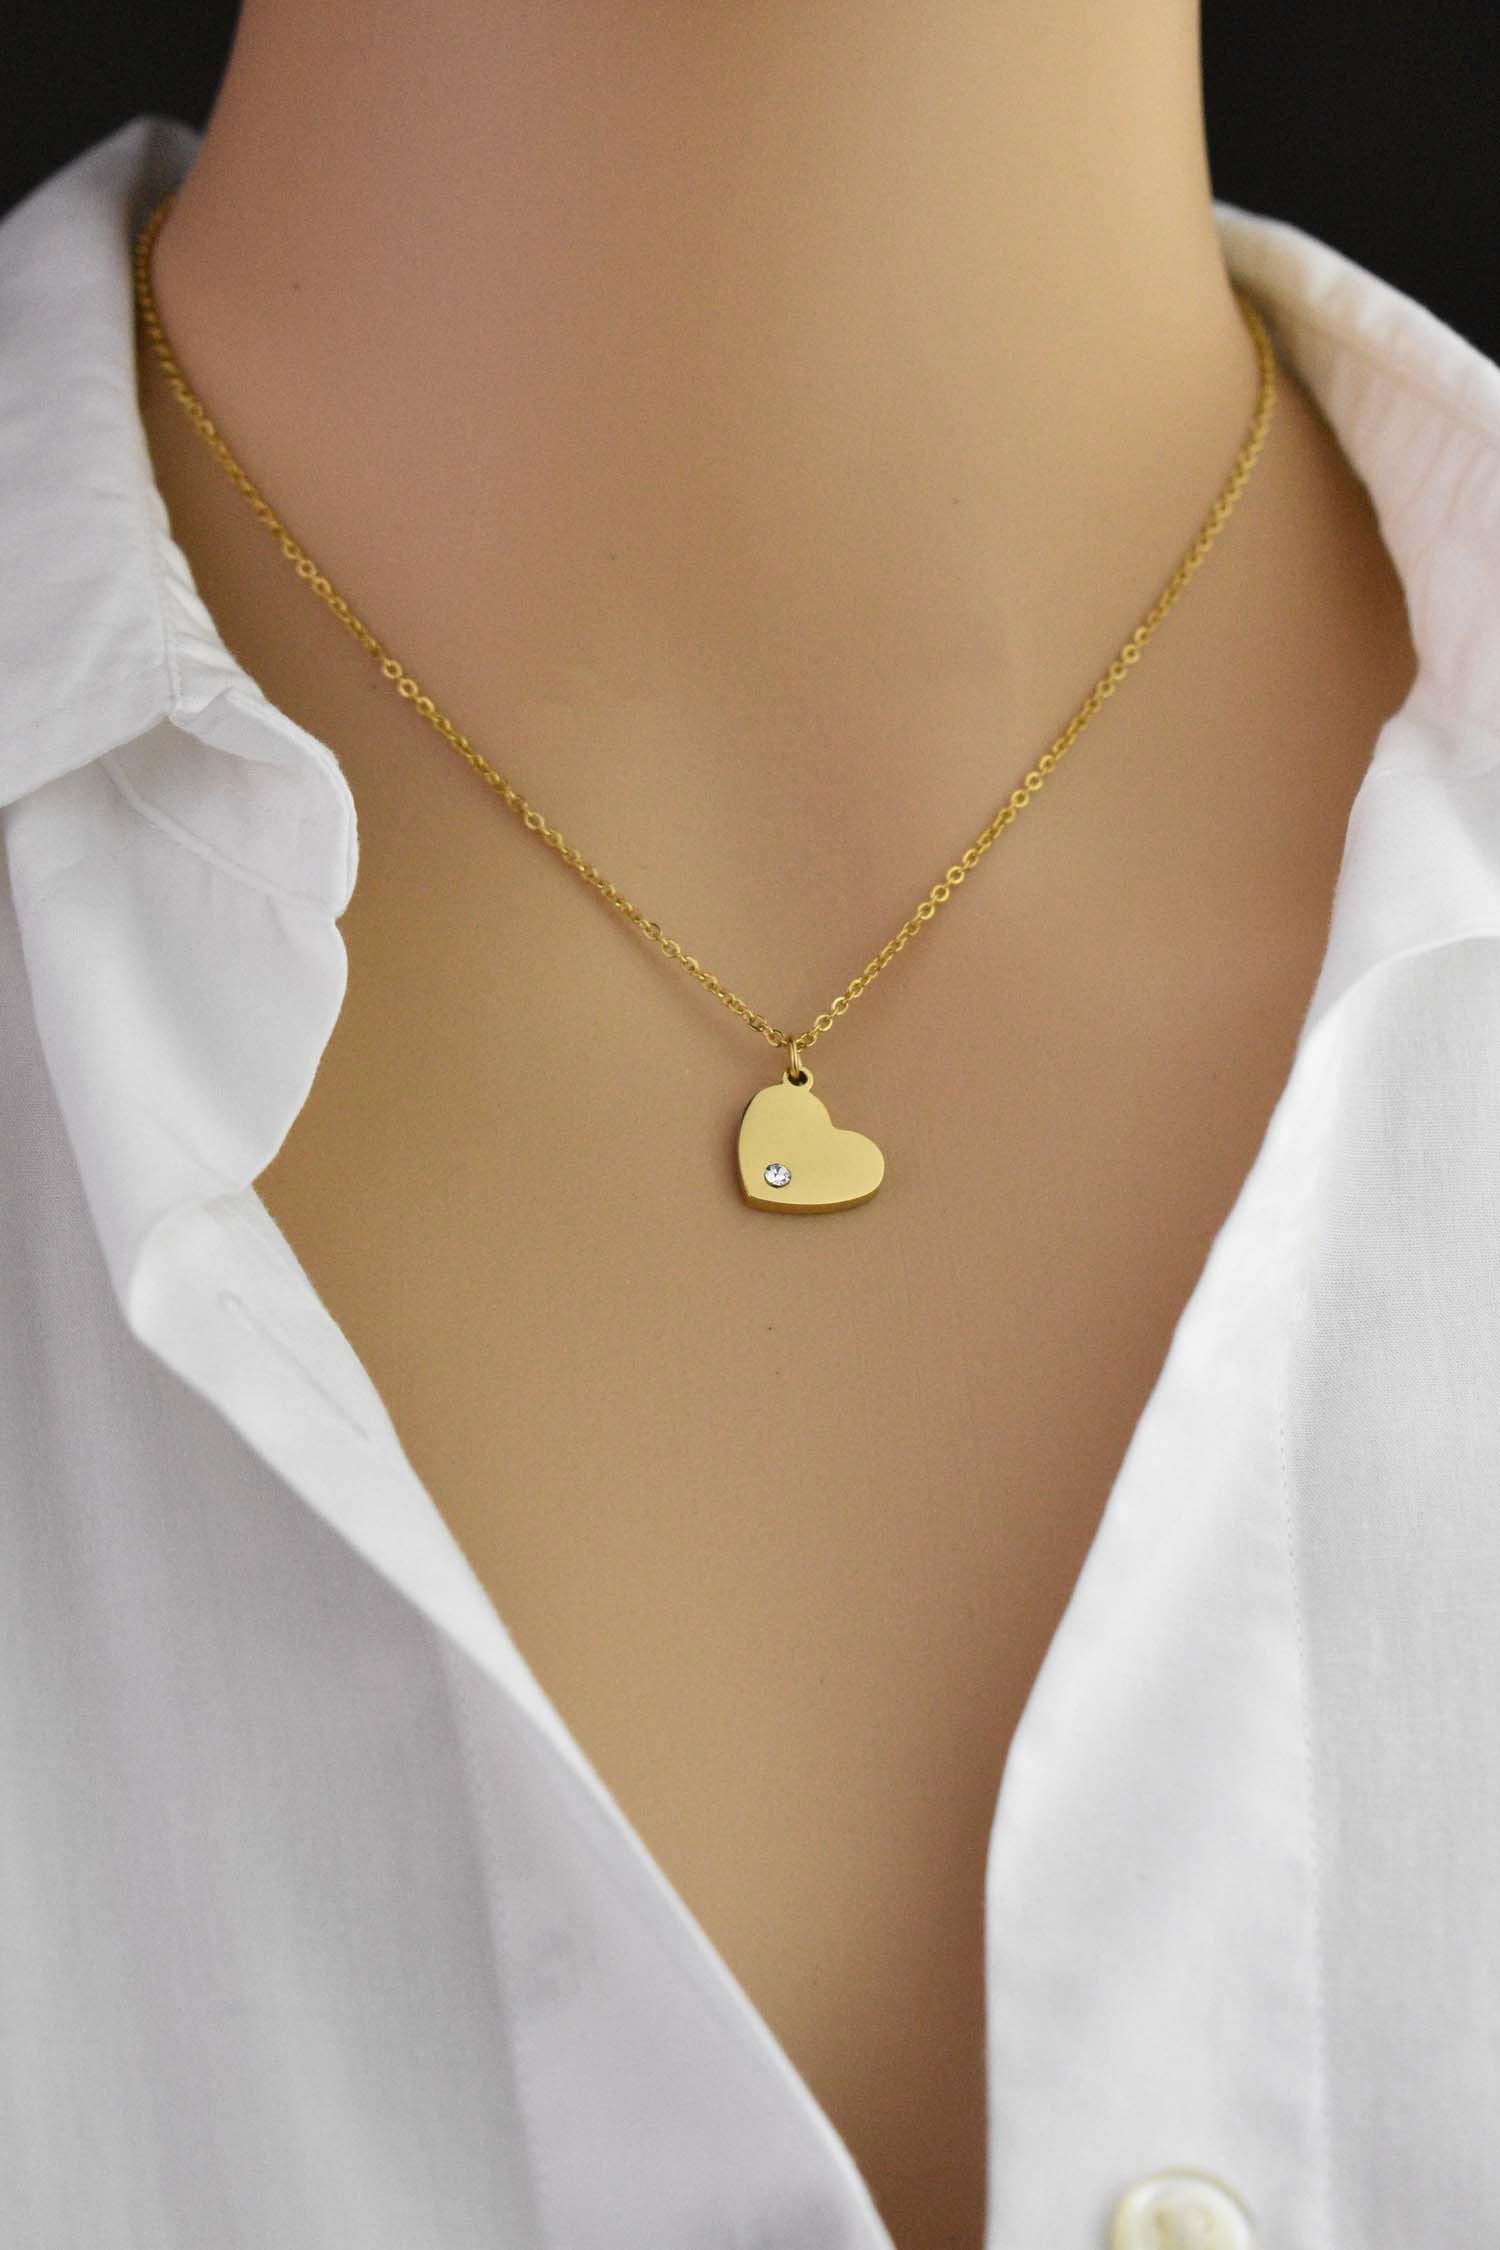 Heart Charm Necklace, Dainty Personalized Heart Pendant Necklace, Heart Initial Necklace, Asymmetrical Engraved heart - Anya Collection